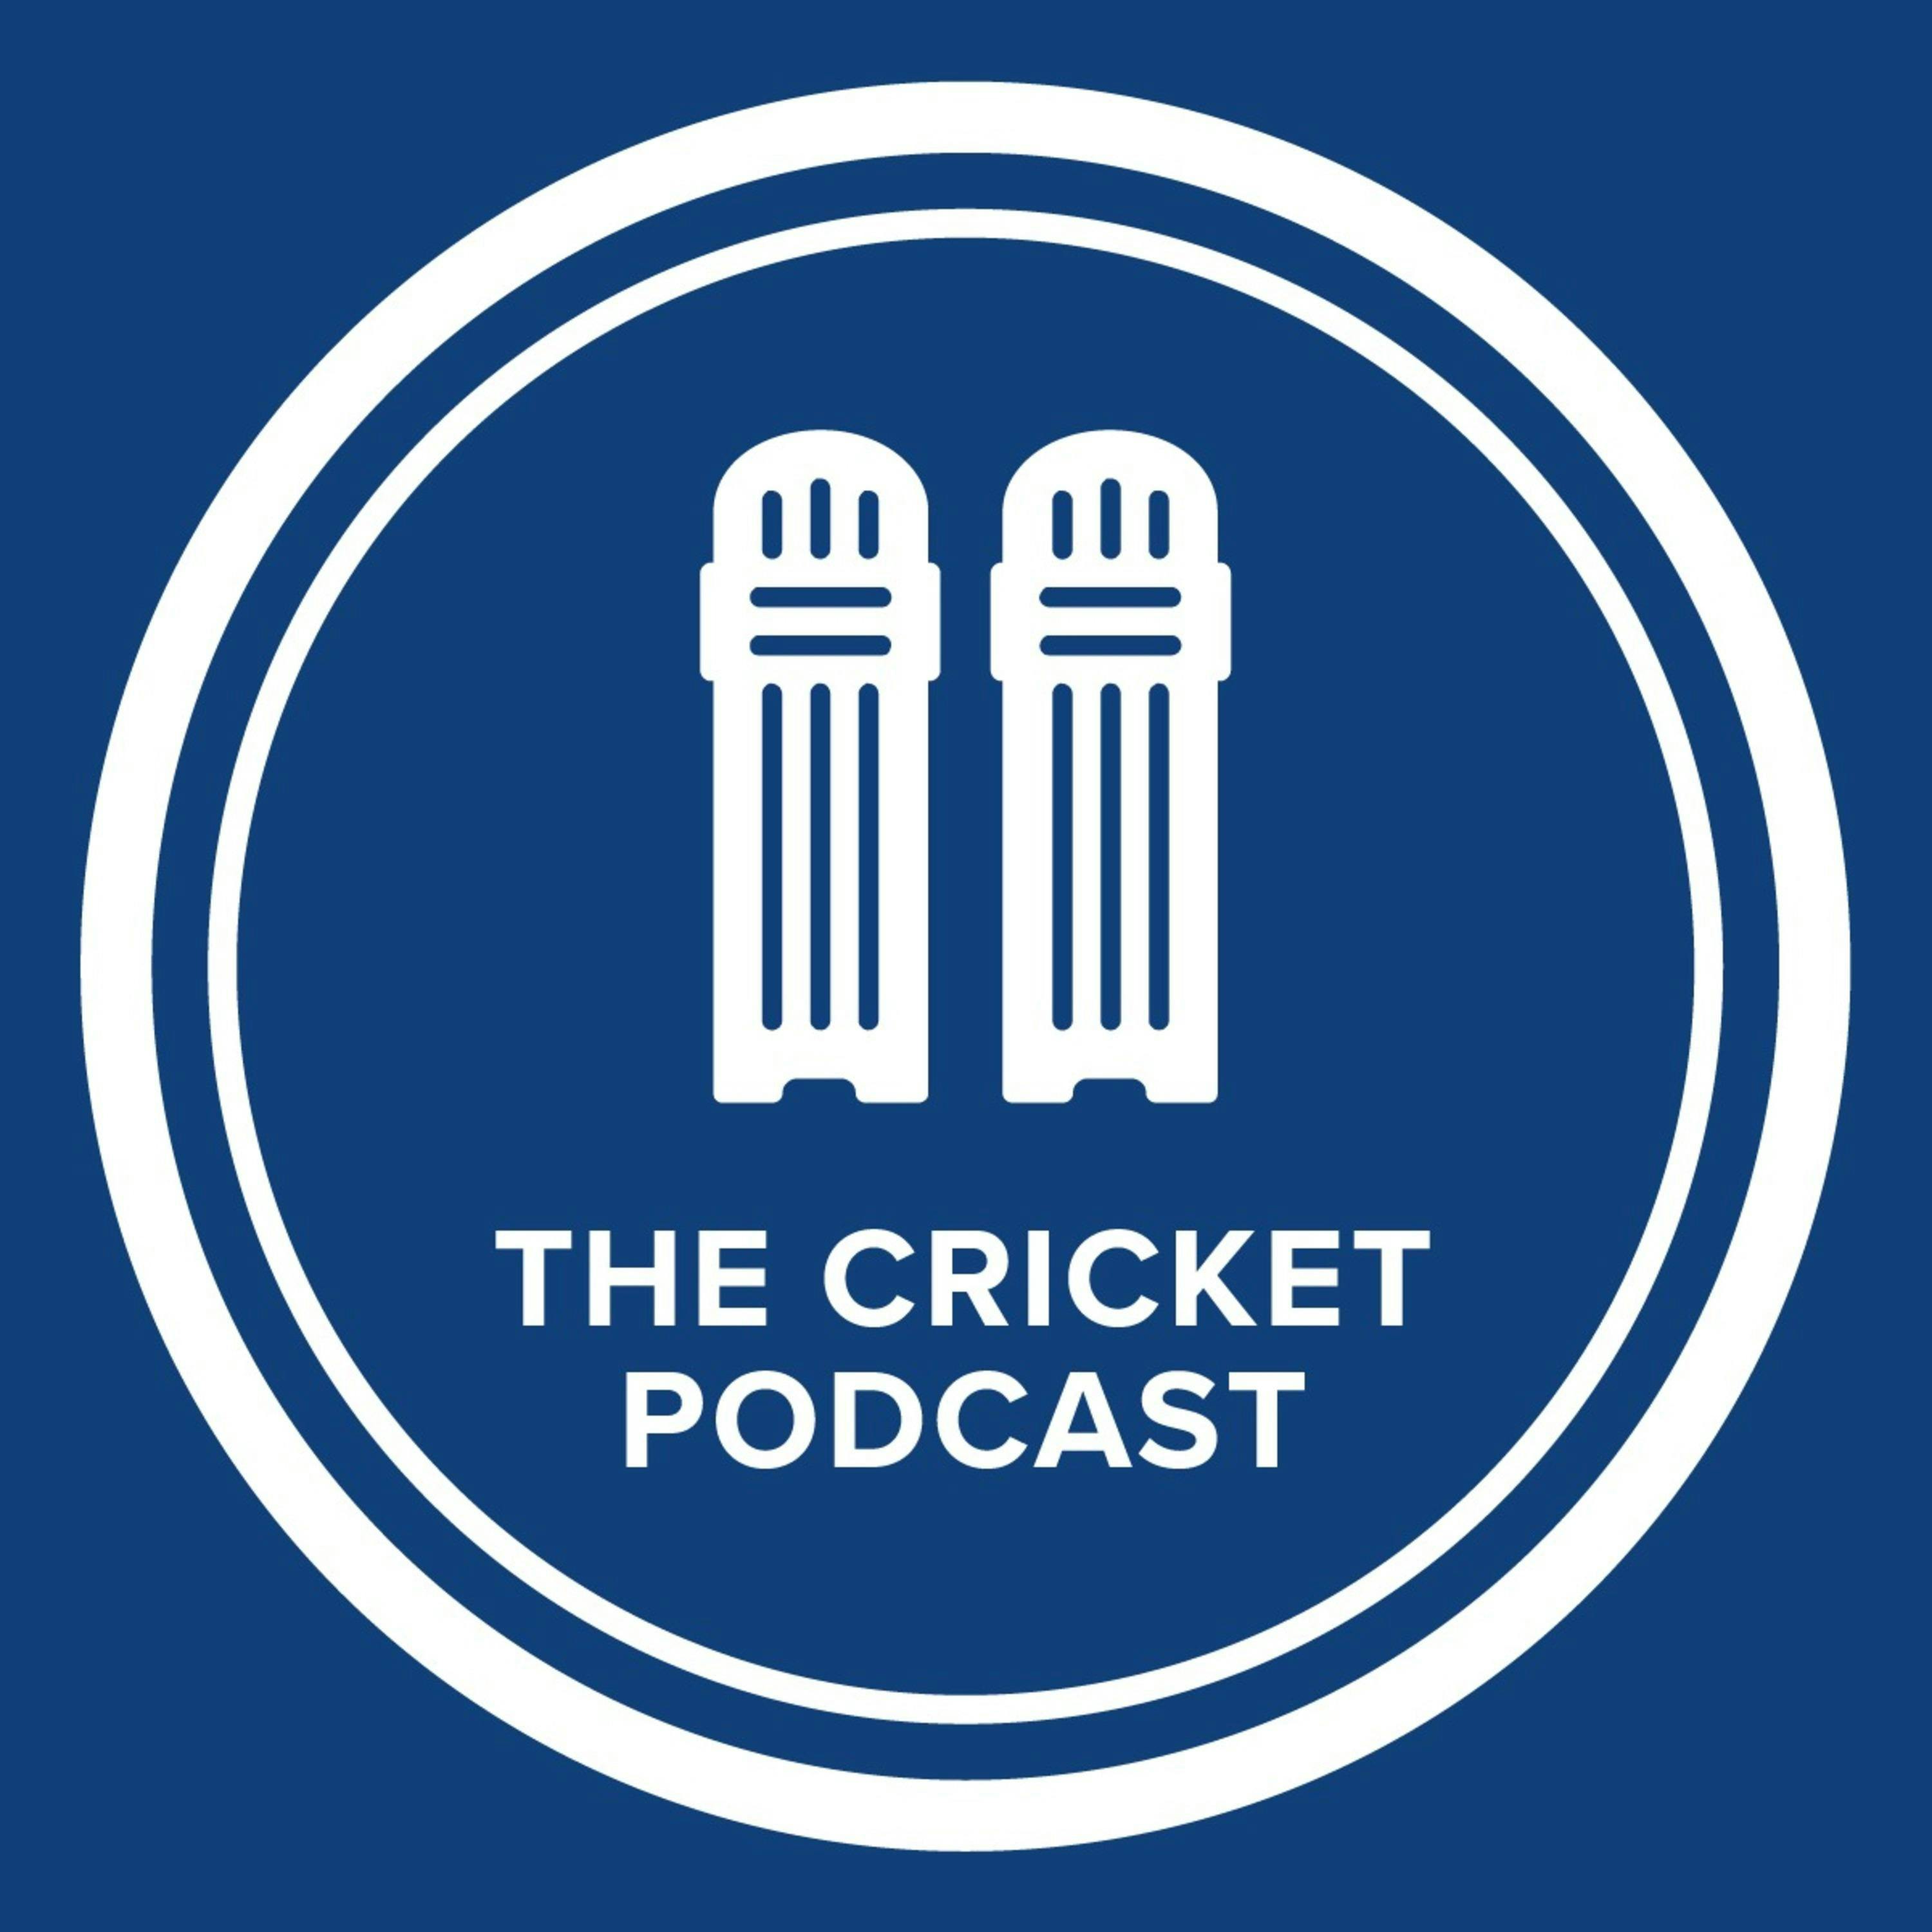 IPL Review Show - Mumbai and Delhi win easily - Prithvi Shaw WOW - And RCB lose to the Kings